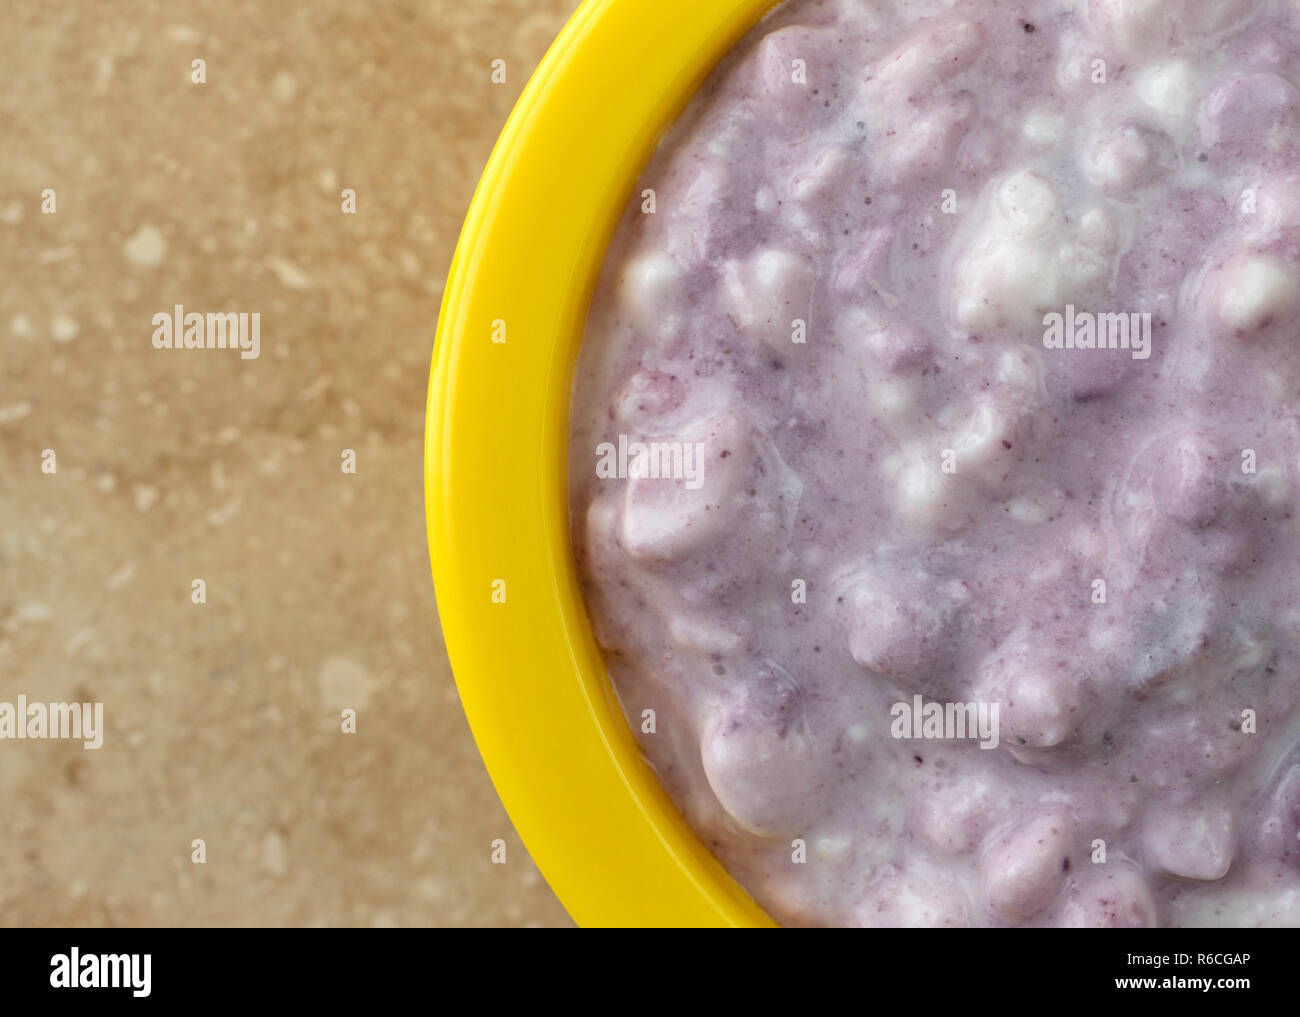 Top close view of a small bright yellow bowl filled with blueberries and cottage cheese on a beige mottled tile. Stock Photo